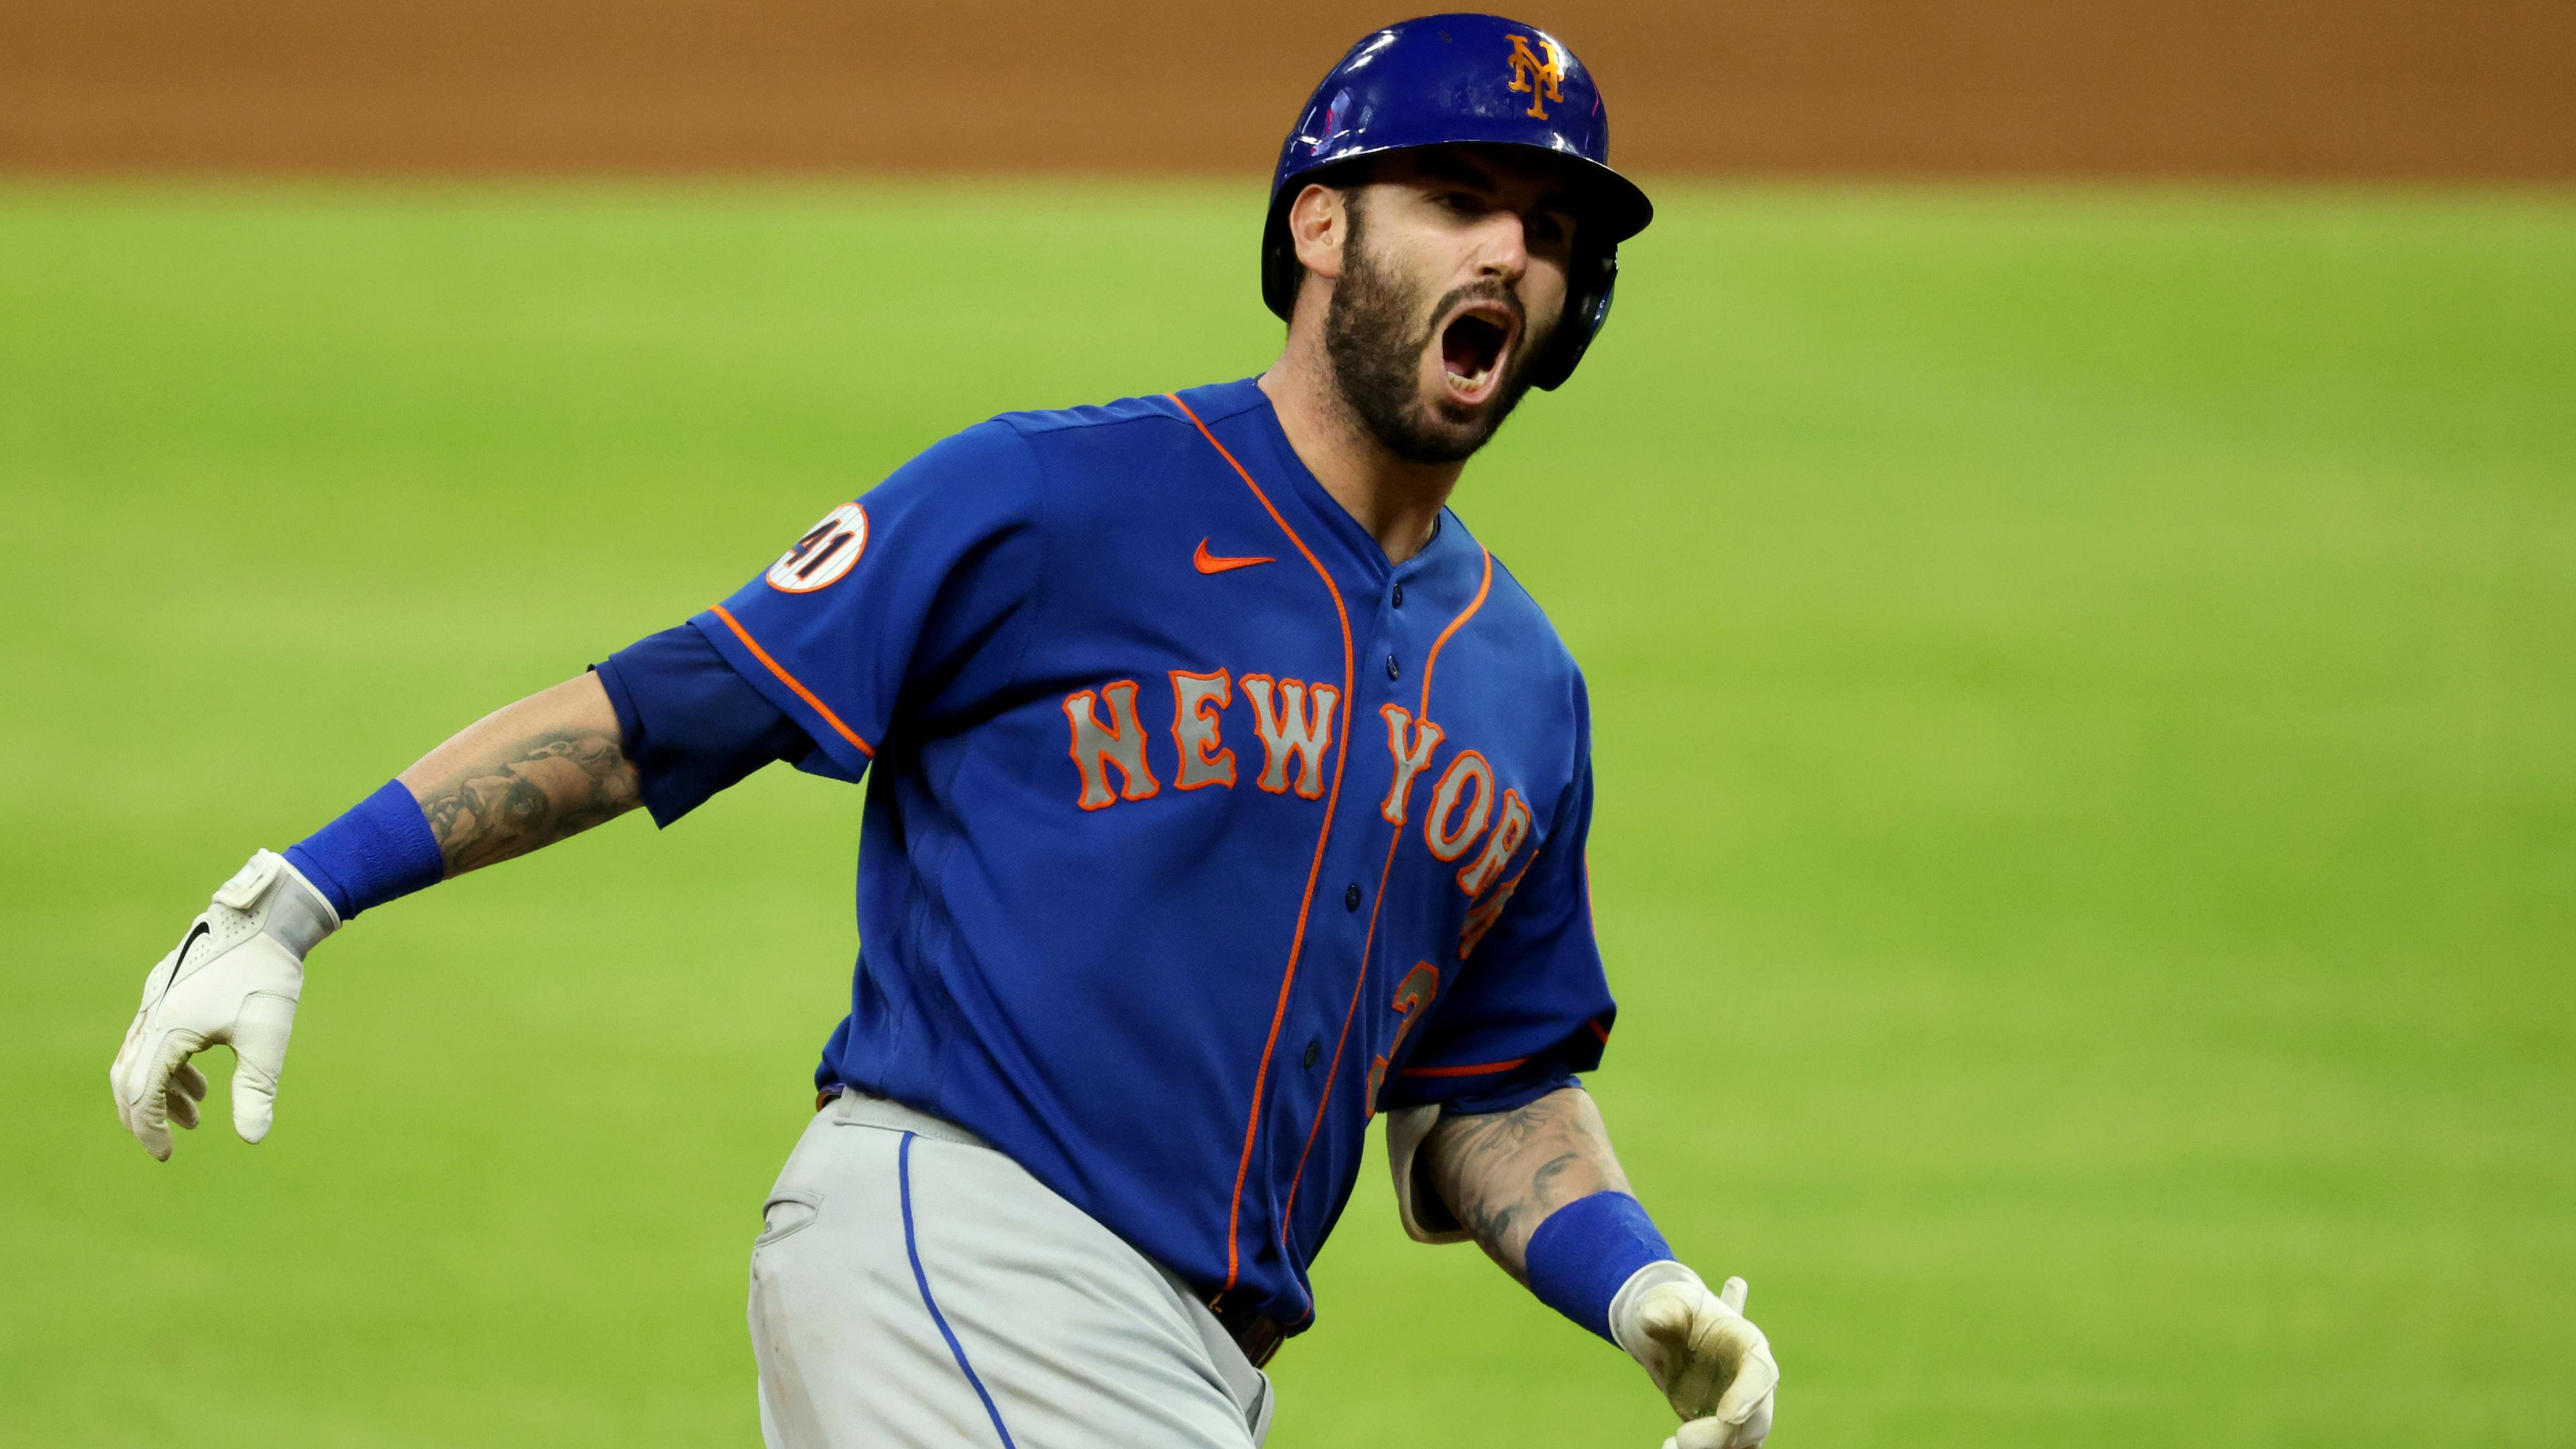 May 18, 2021; Atlanta, Georgia, USA; New York Mets catcher Tomas Nido (3) reacts after hitting a solo home run during the ninth inning against the Atlanta Braves at Truist Park. / Jason Getz-USA TODAY Sports